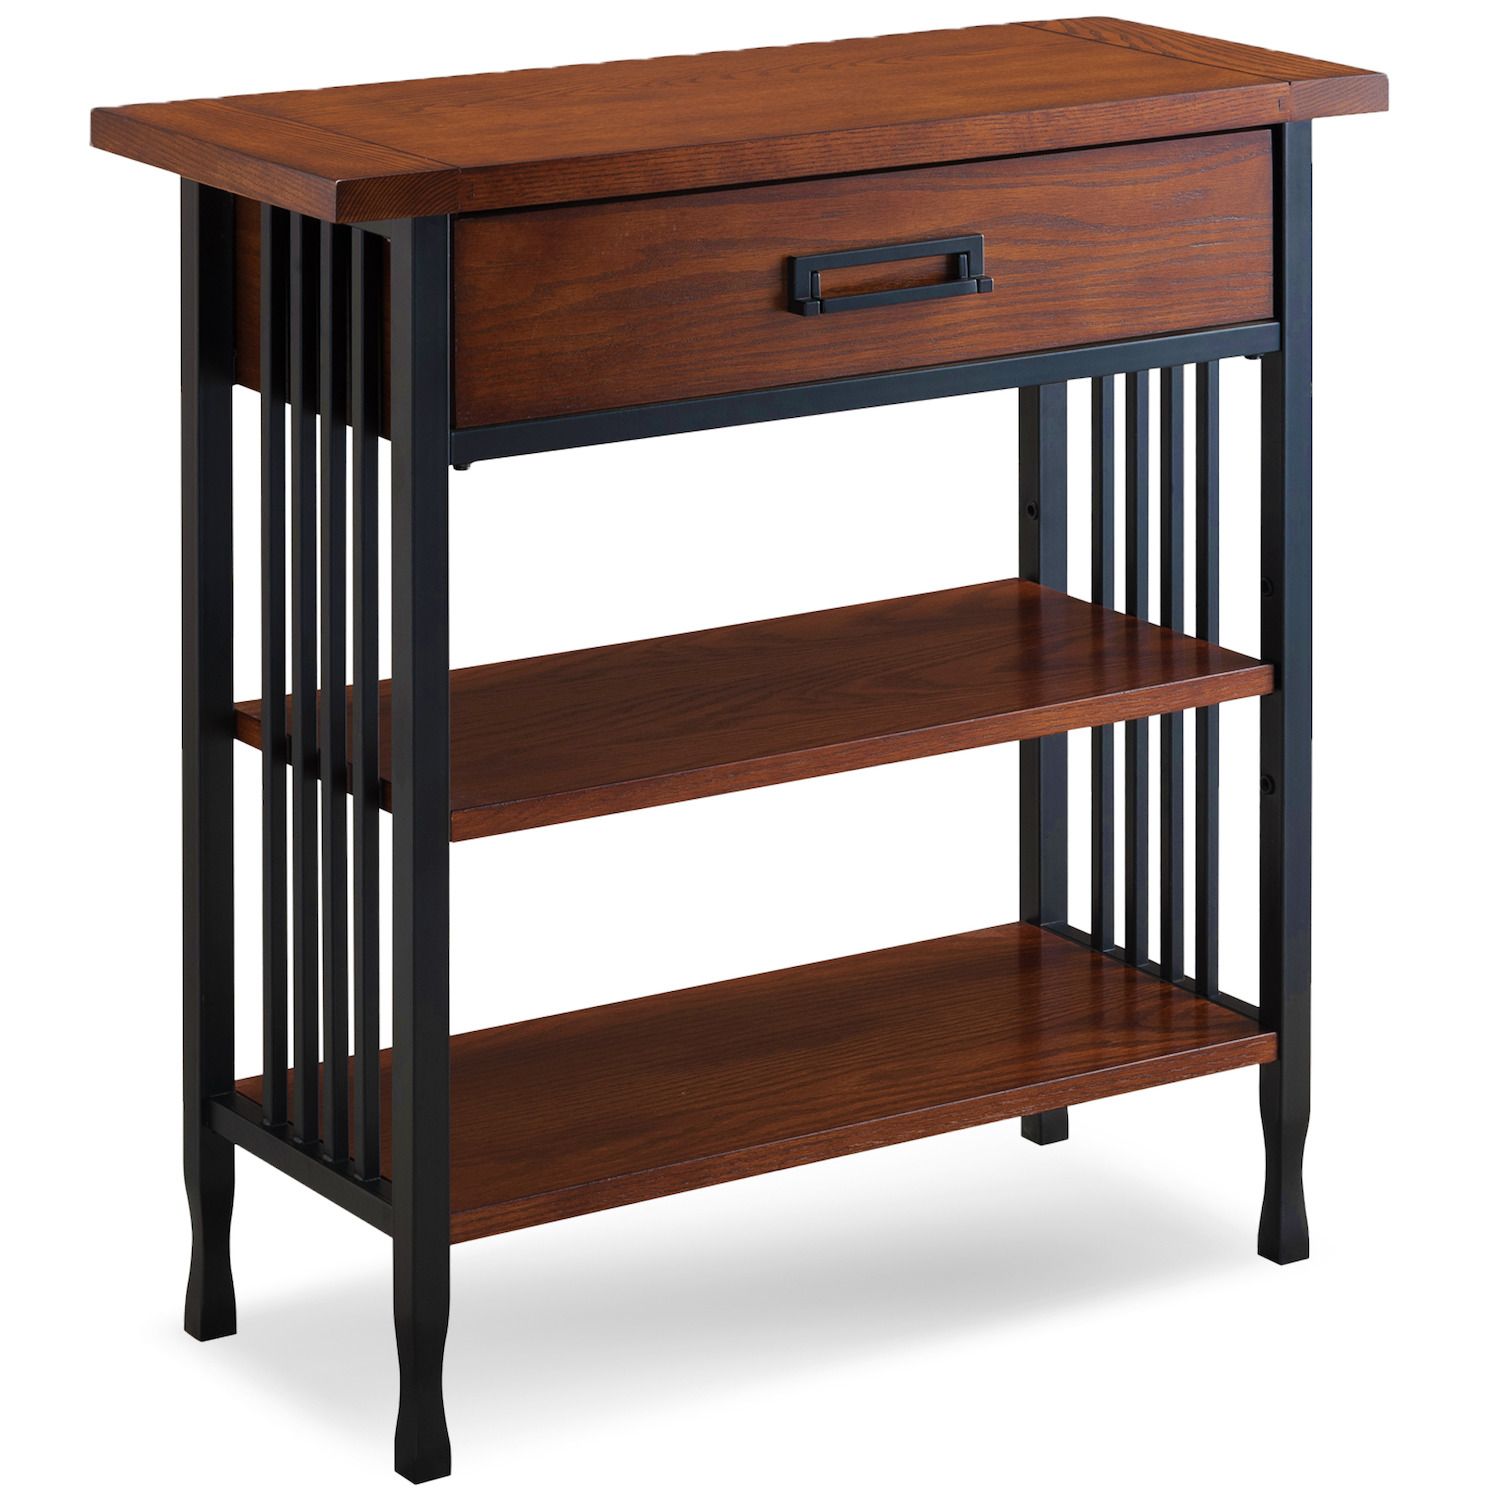 Image for Leick Furniture Ironcraft Bookcase with Drawer Storage at Kohl's.